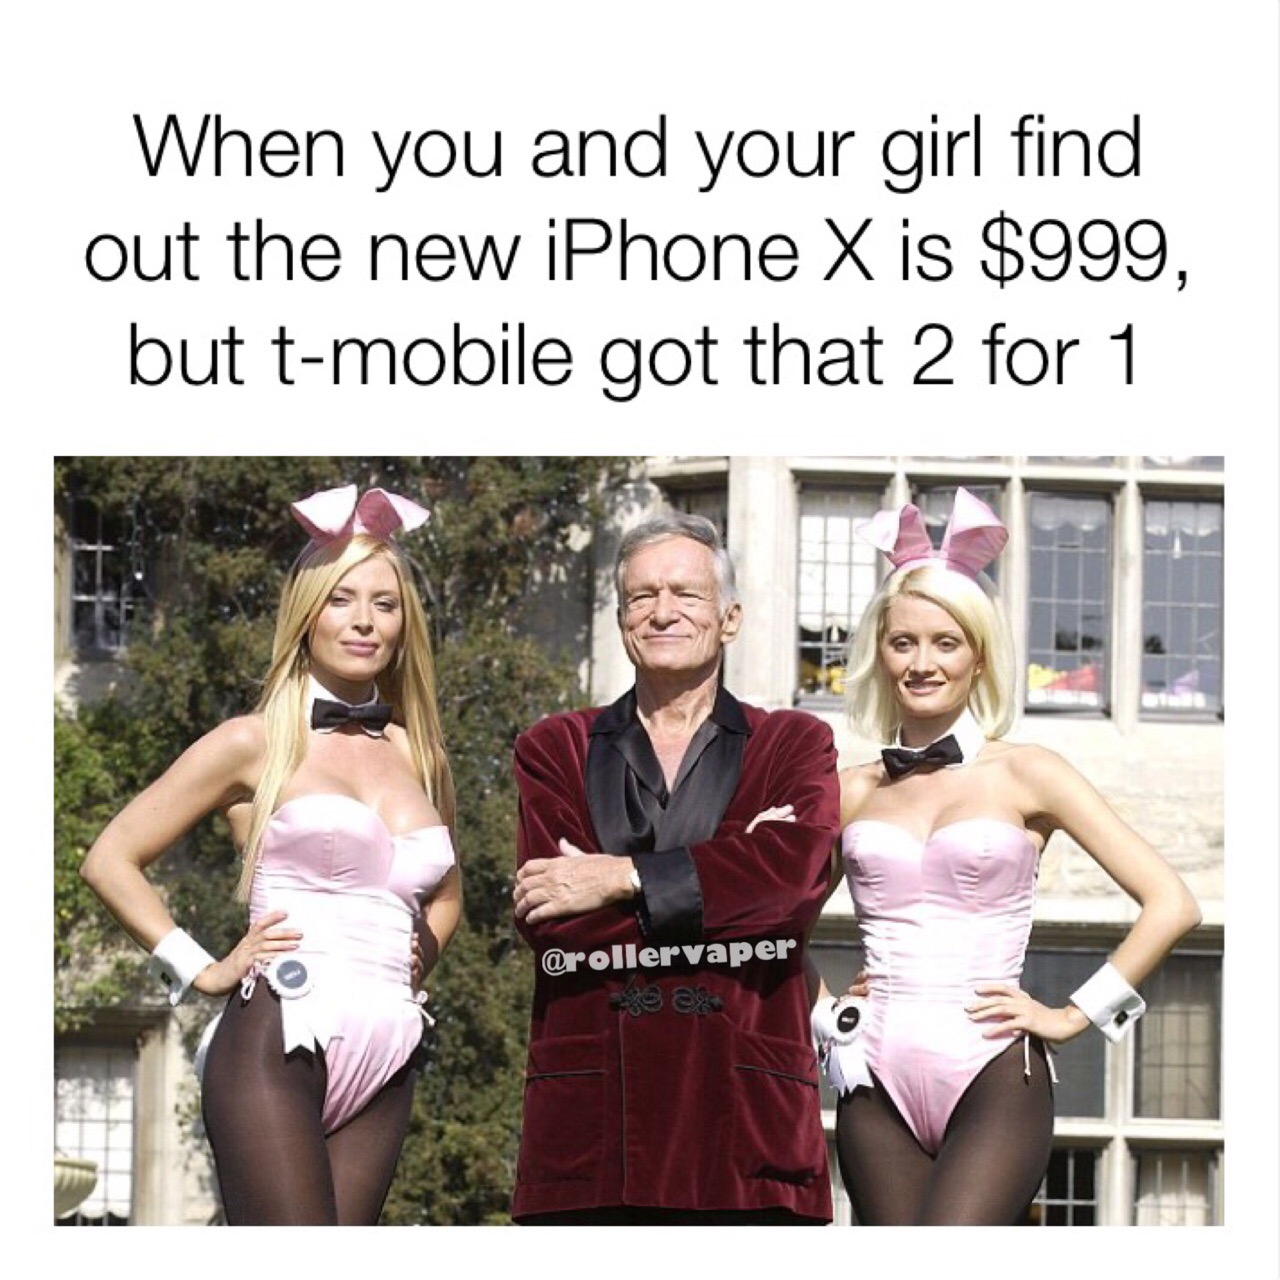 playboy bunny l - When you and your girl find out the new iPhone X is $999, but tmobile got that 2 for 1